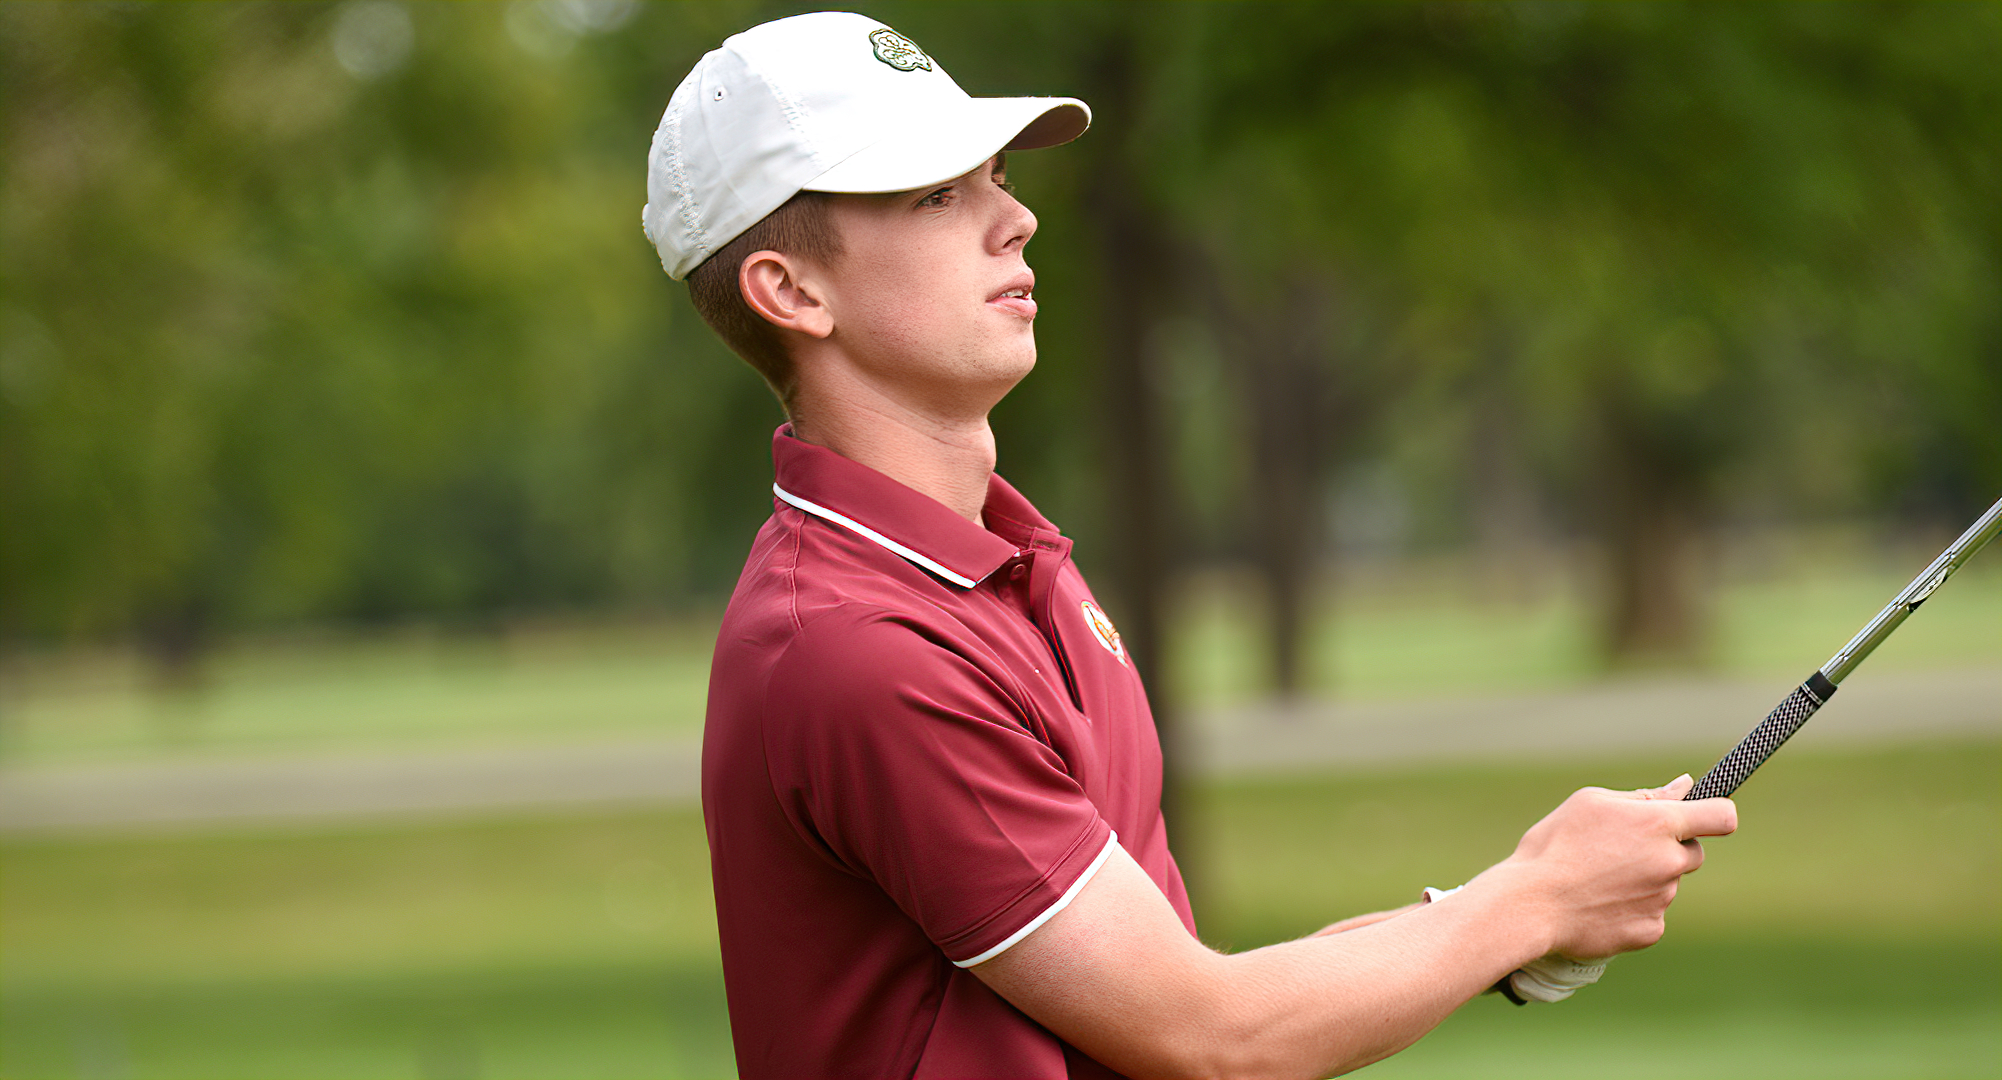 Sam Henke led a group of four golfers who all finished in the Top 15 at the SJU Invite. He shot a total of 148 and posted his first Top 5 finish of the year.